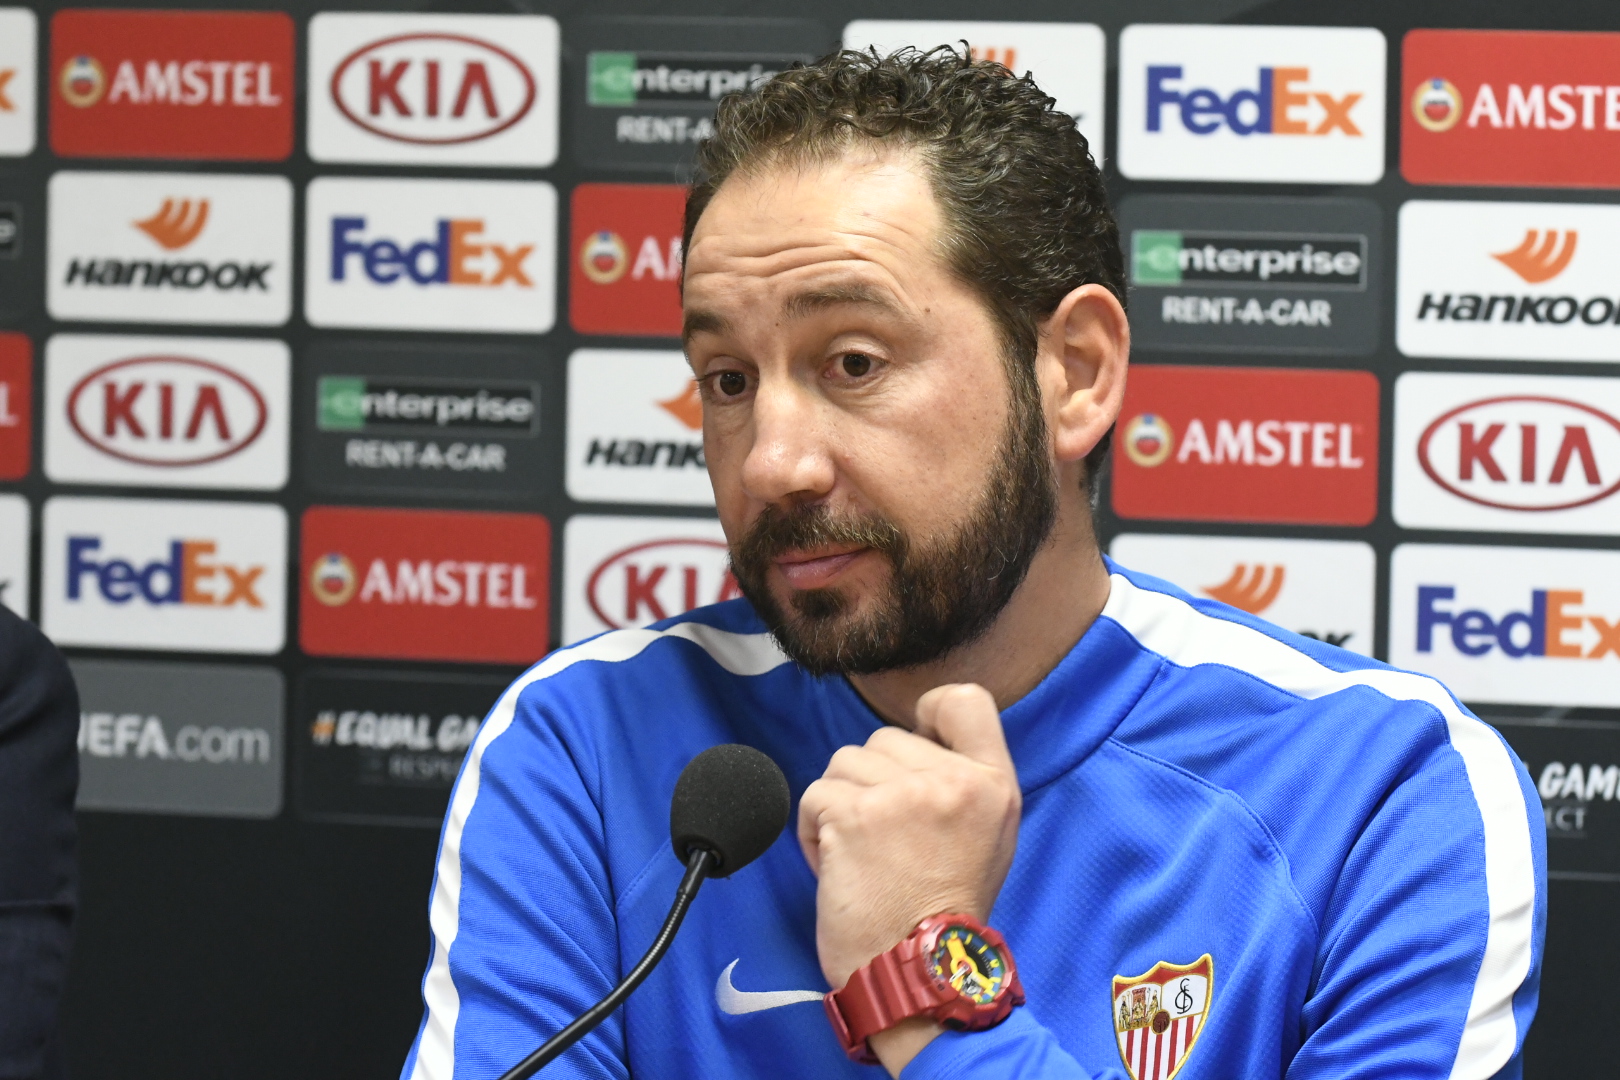 Pablo Machín in the press room of the Maurice Dufrasne